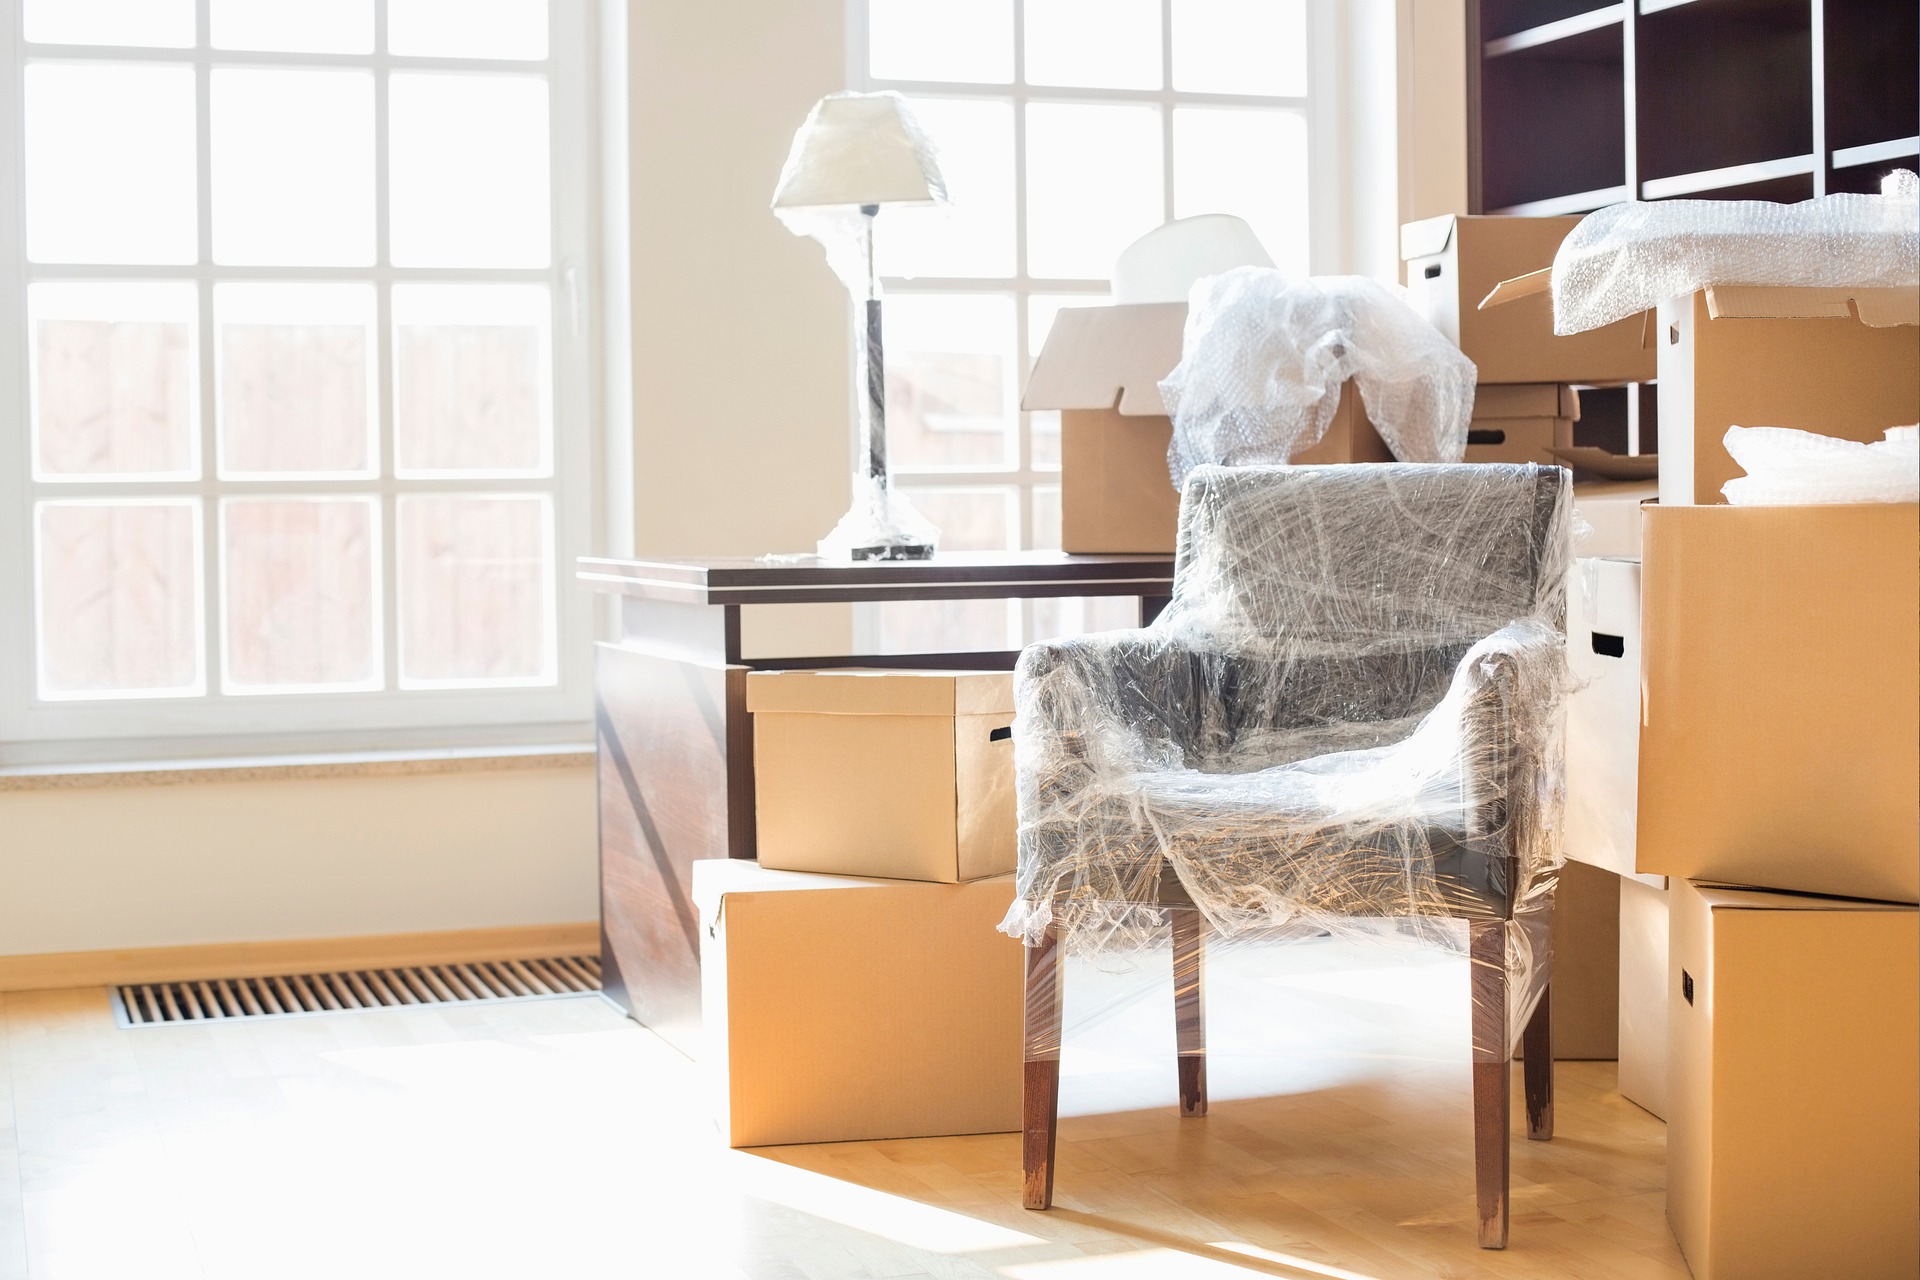 Everything Property Investors Need to Know About Move-In & Move-Out Inspections